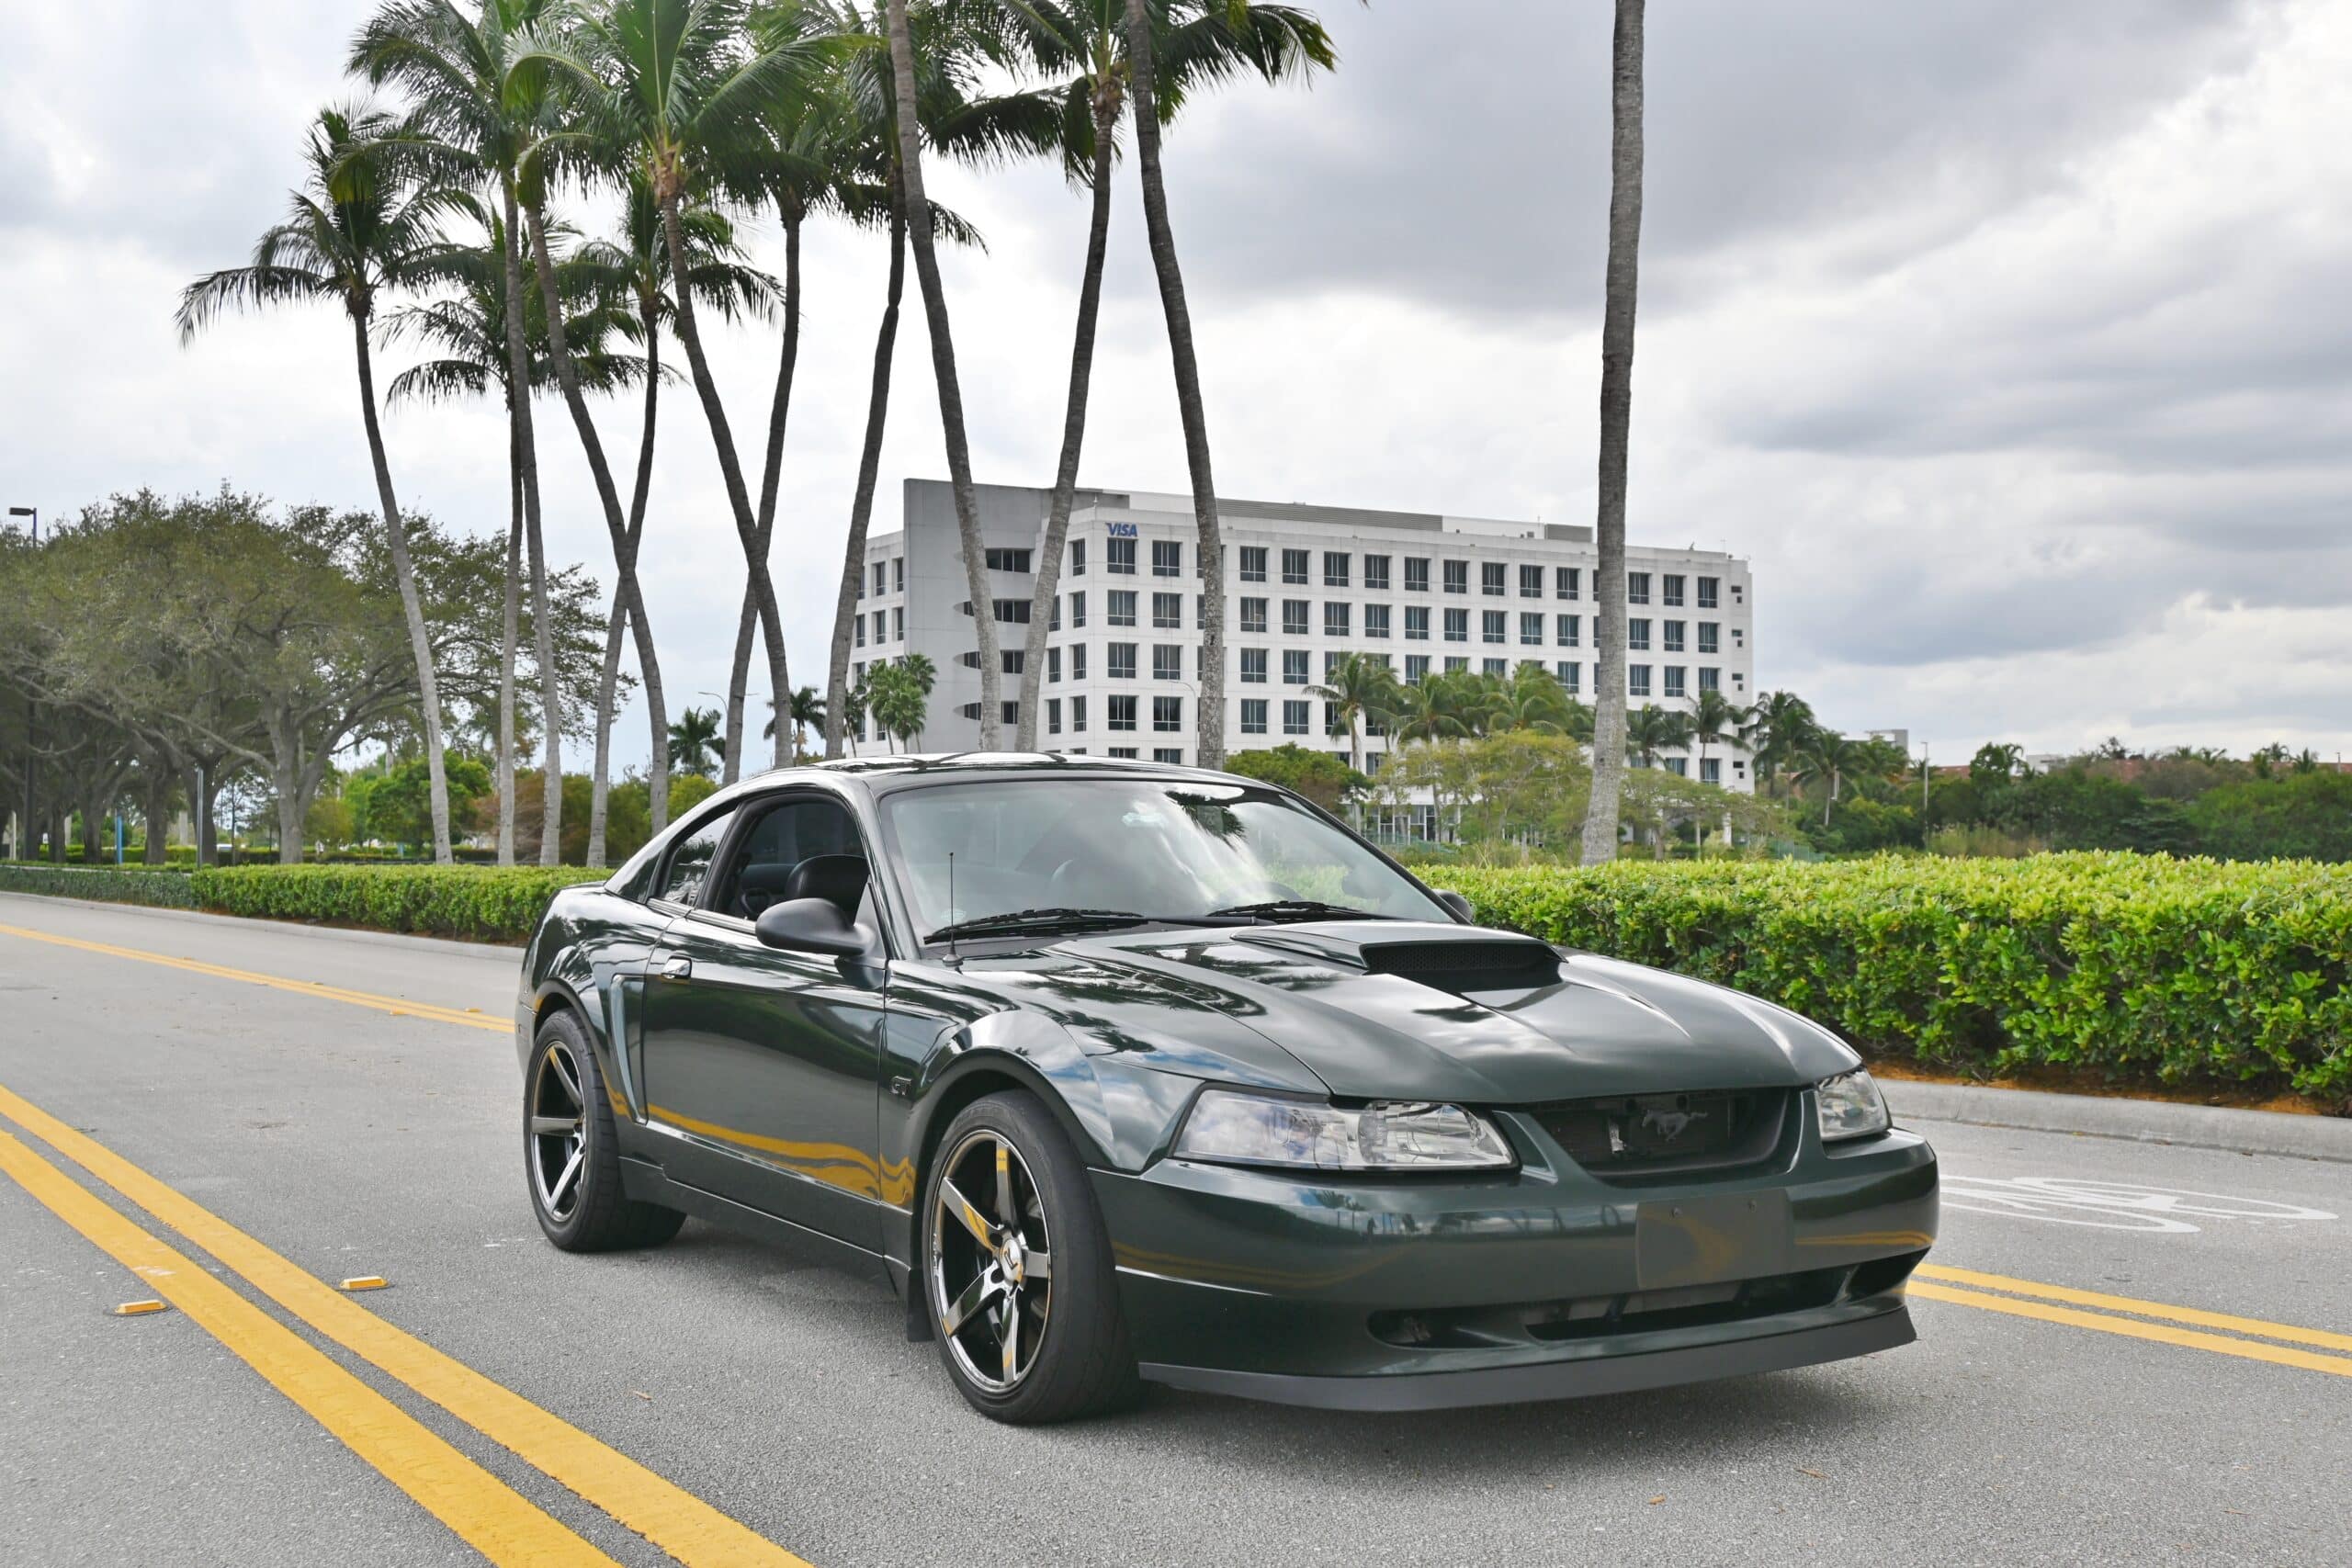 2001 Ford Mustang Bullitt #4382 1 of 5,582 ever made Nicely Modified /Supercharged /Well Sorted /Only 72k Miles